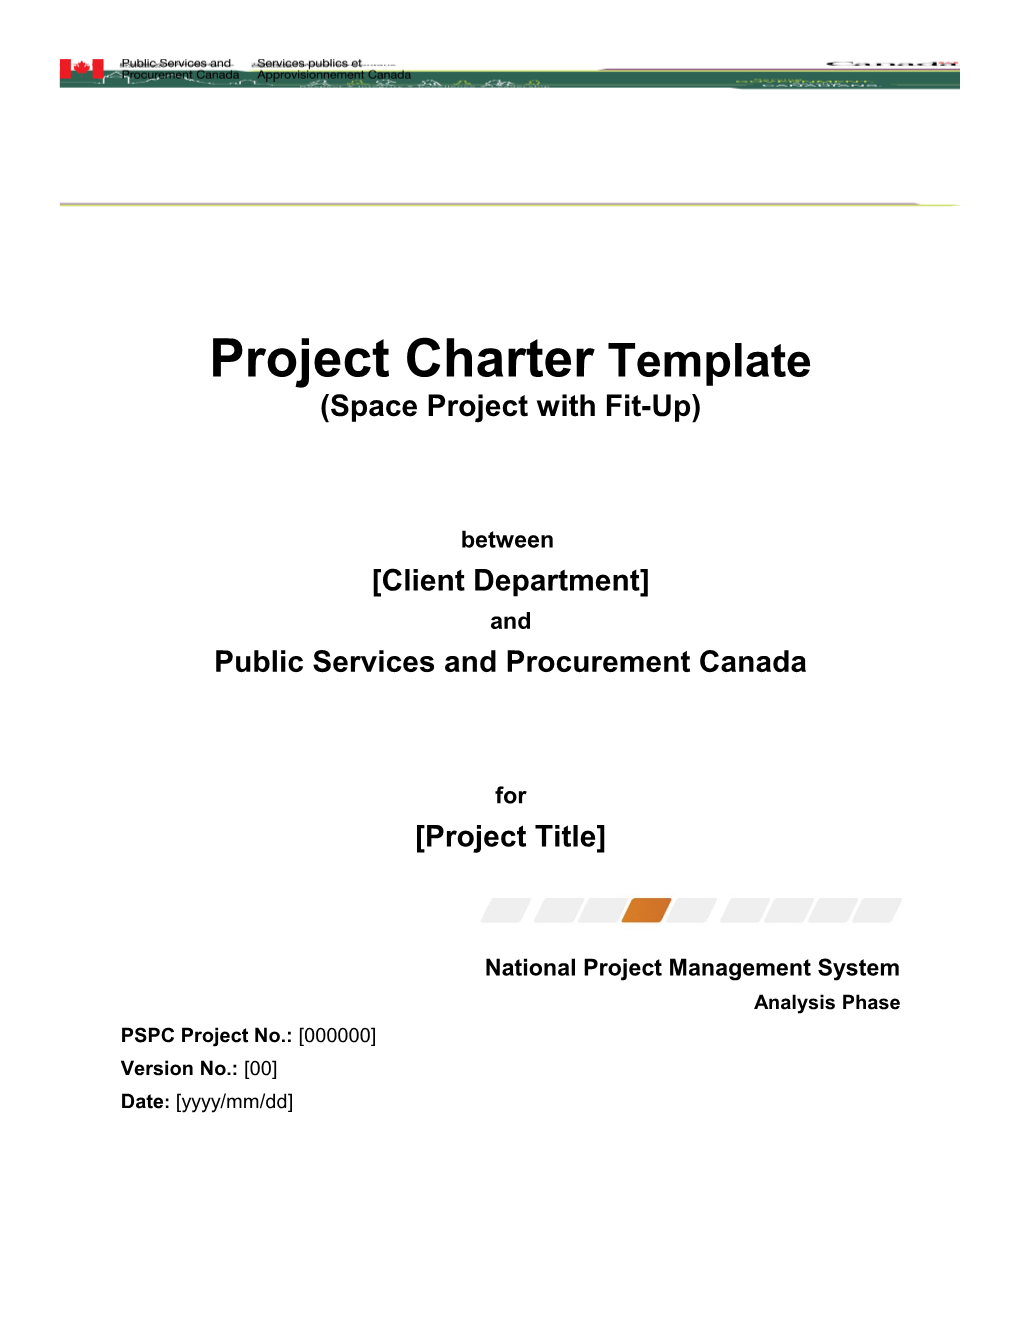 Project Chartertemplate (Space Project with Fit-Up)